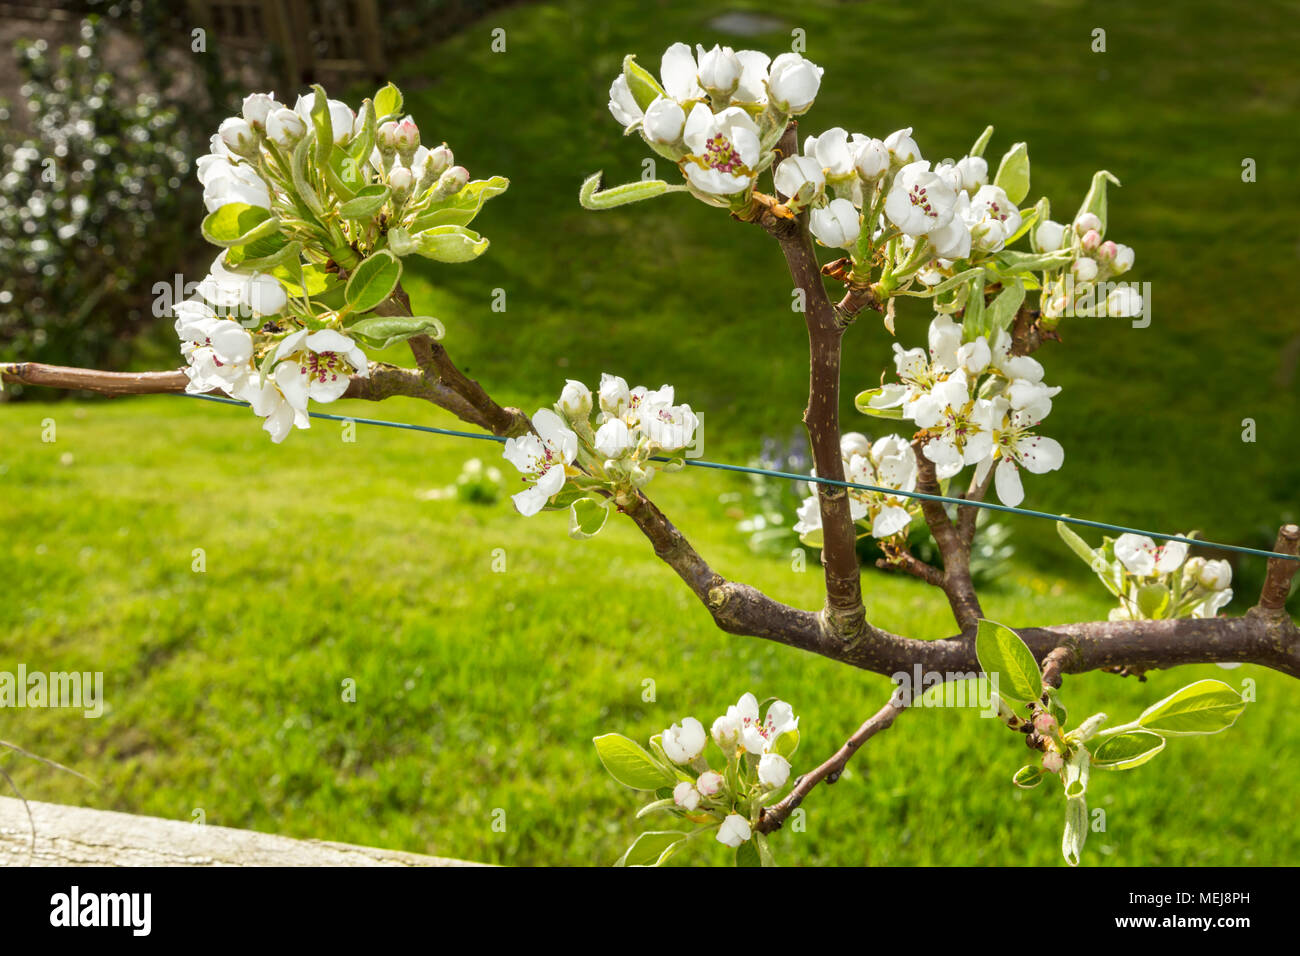 Blossom on an espalier pear tree, Doyenne De Comice, above a small orchard. Stock Photo